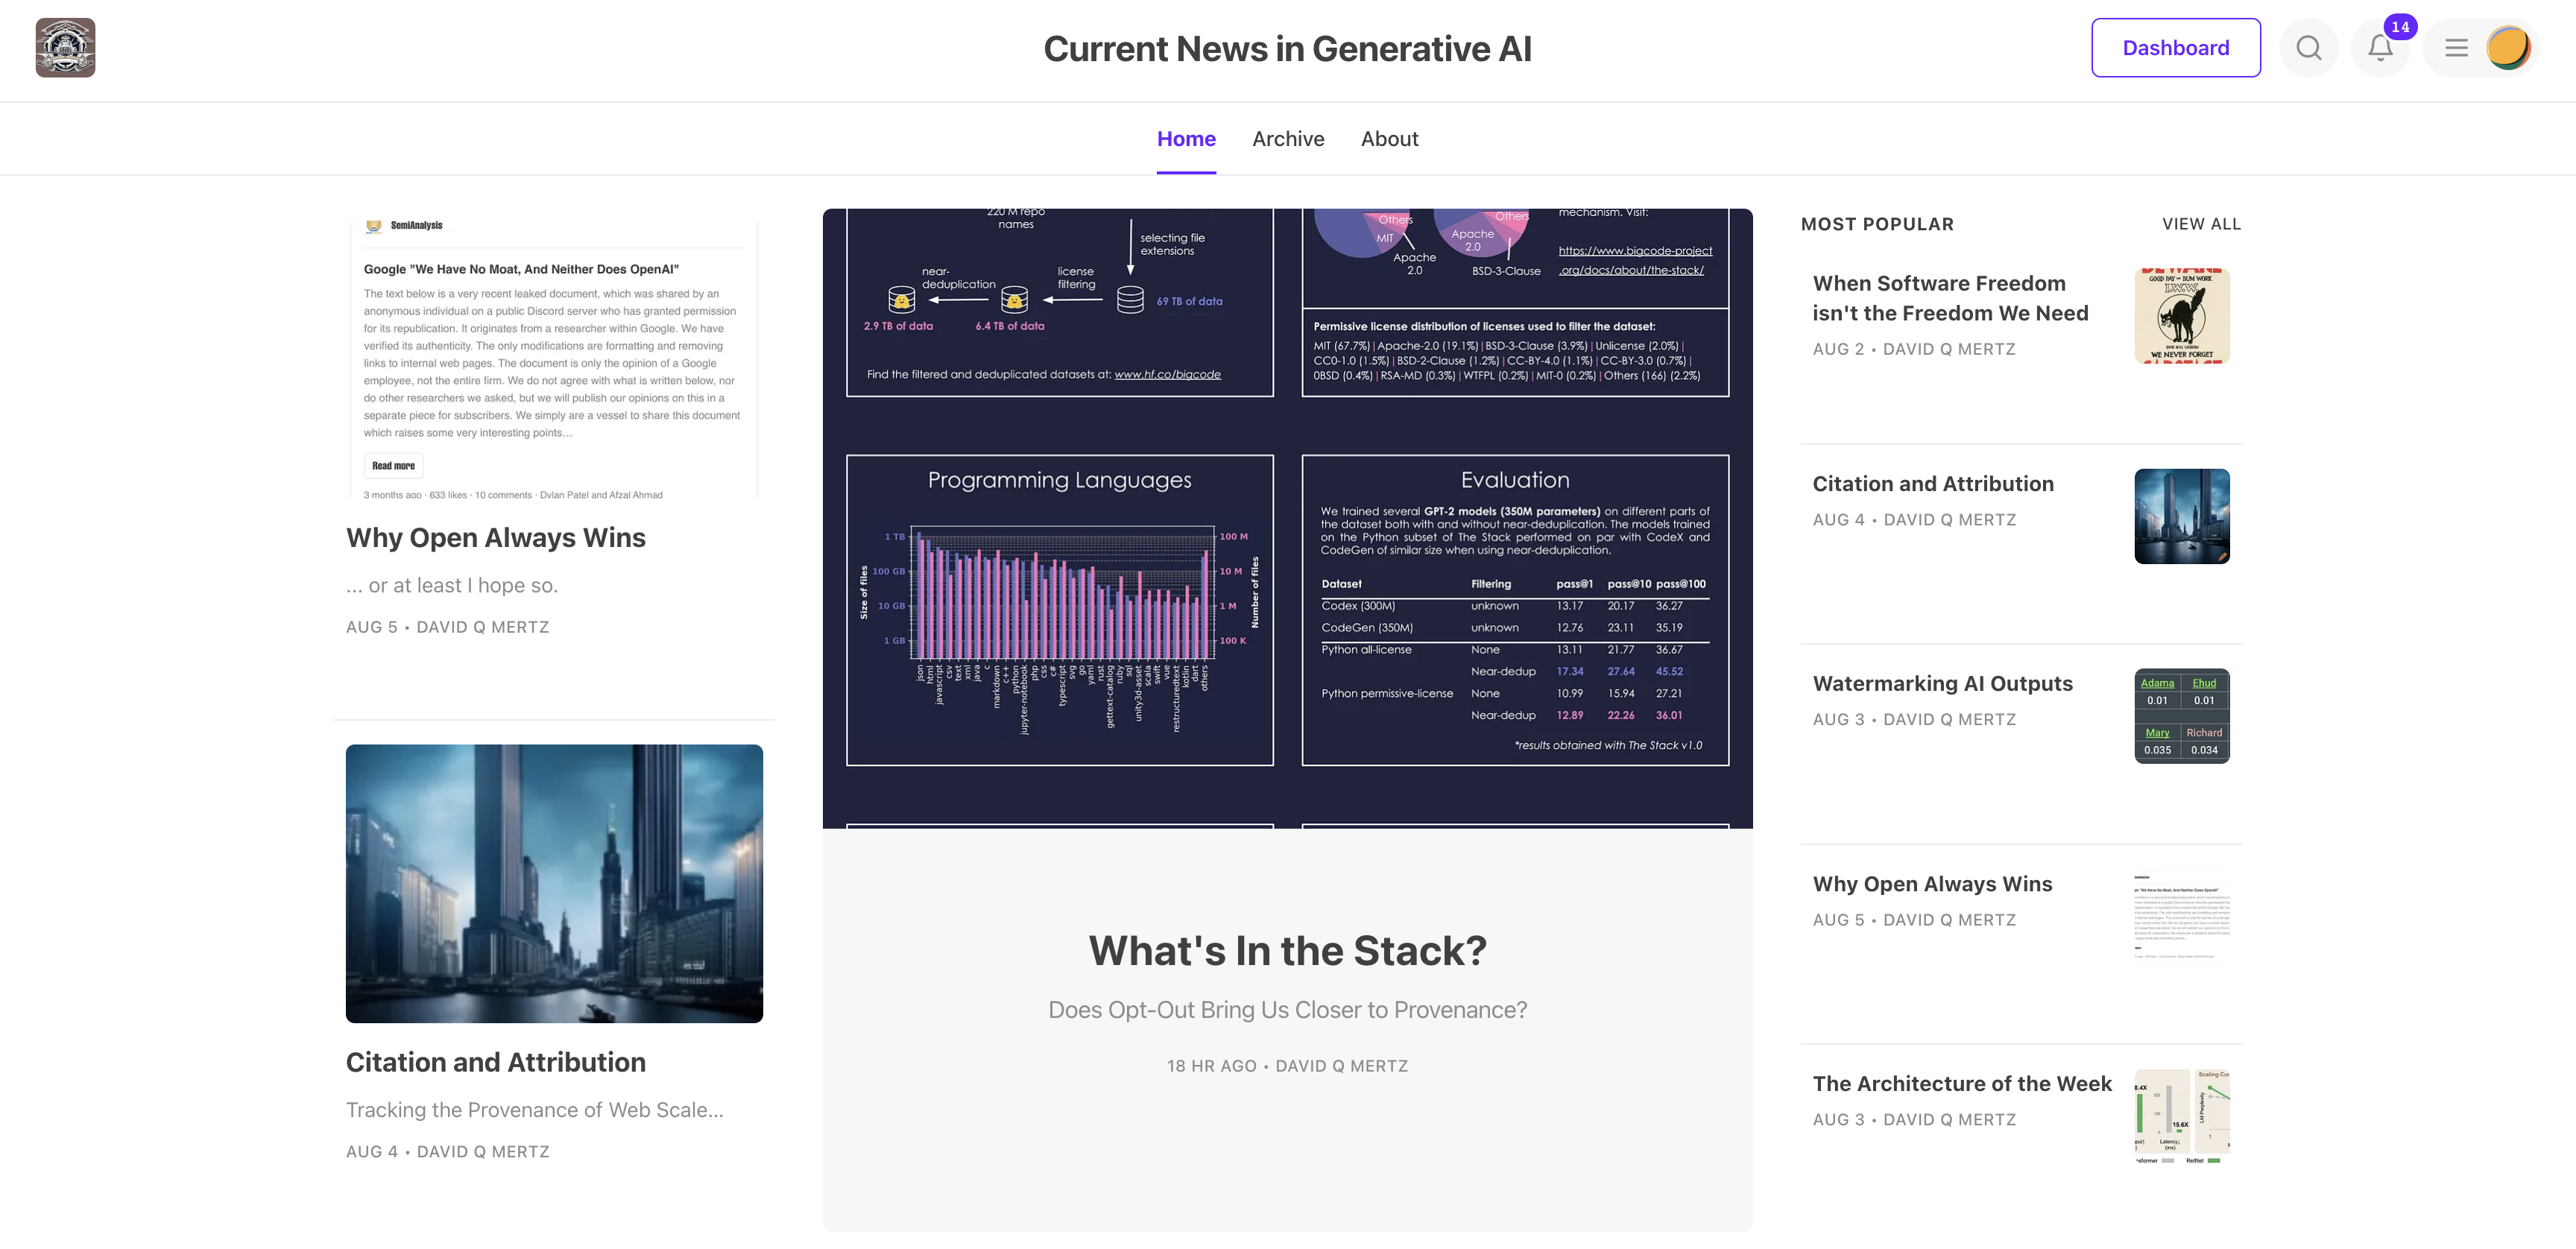 A screenshot of the “Current News in Generative AI” Substack blog